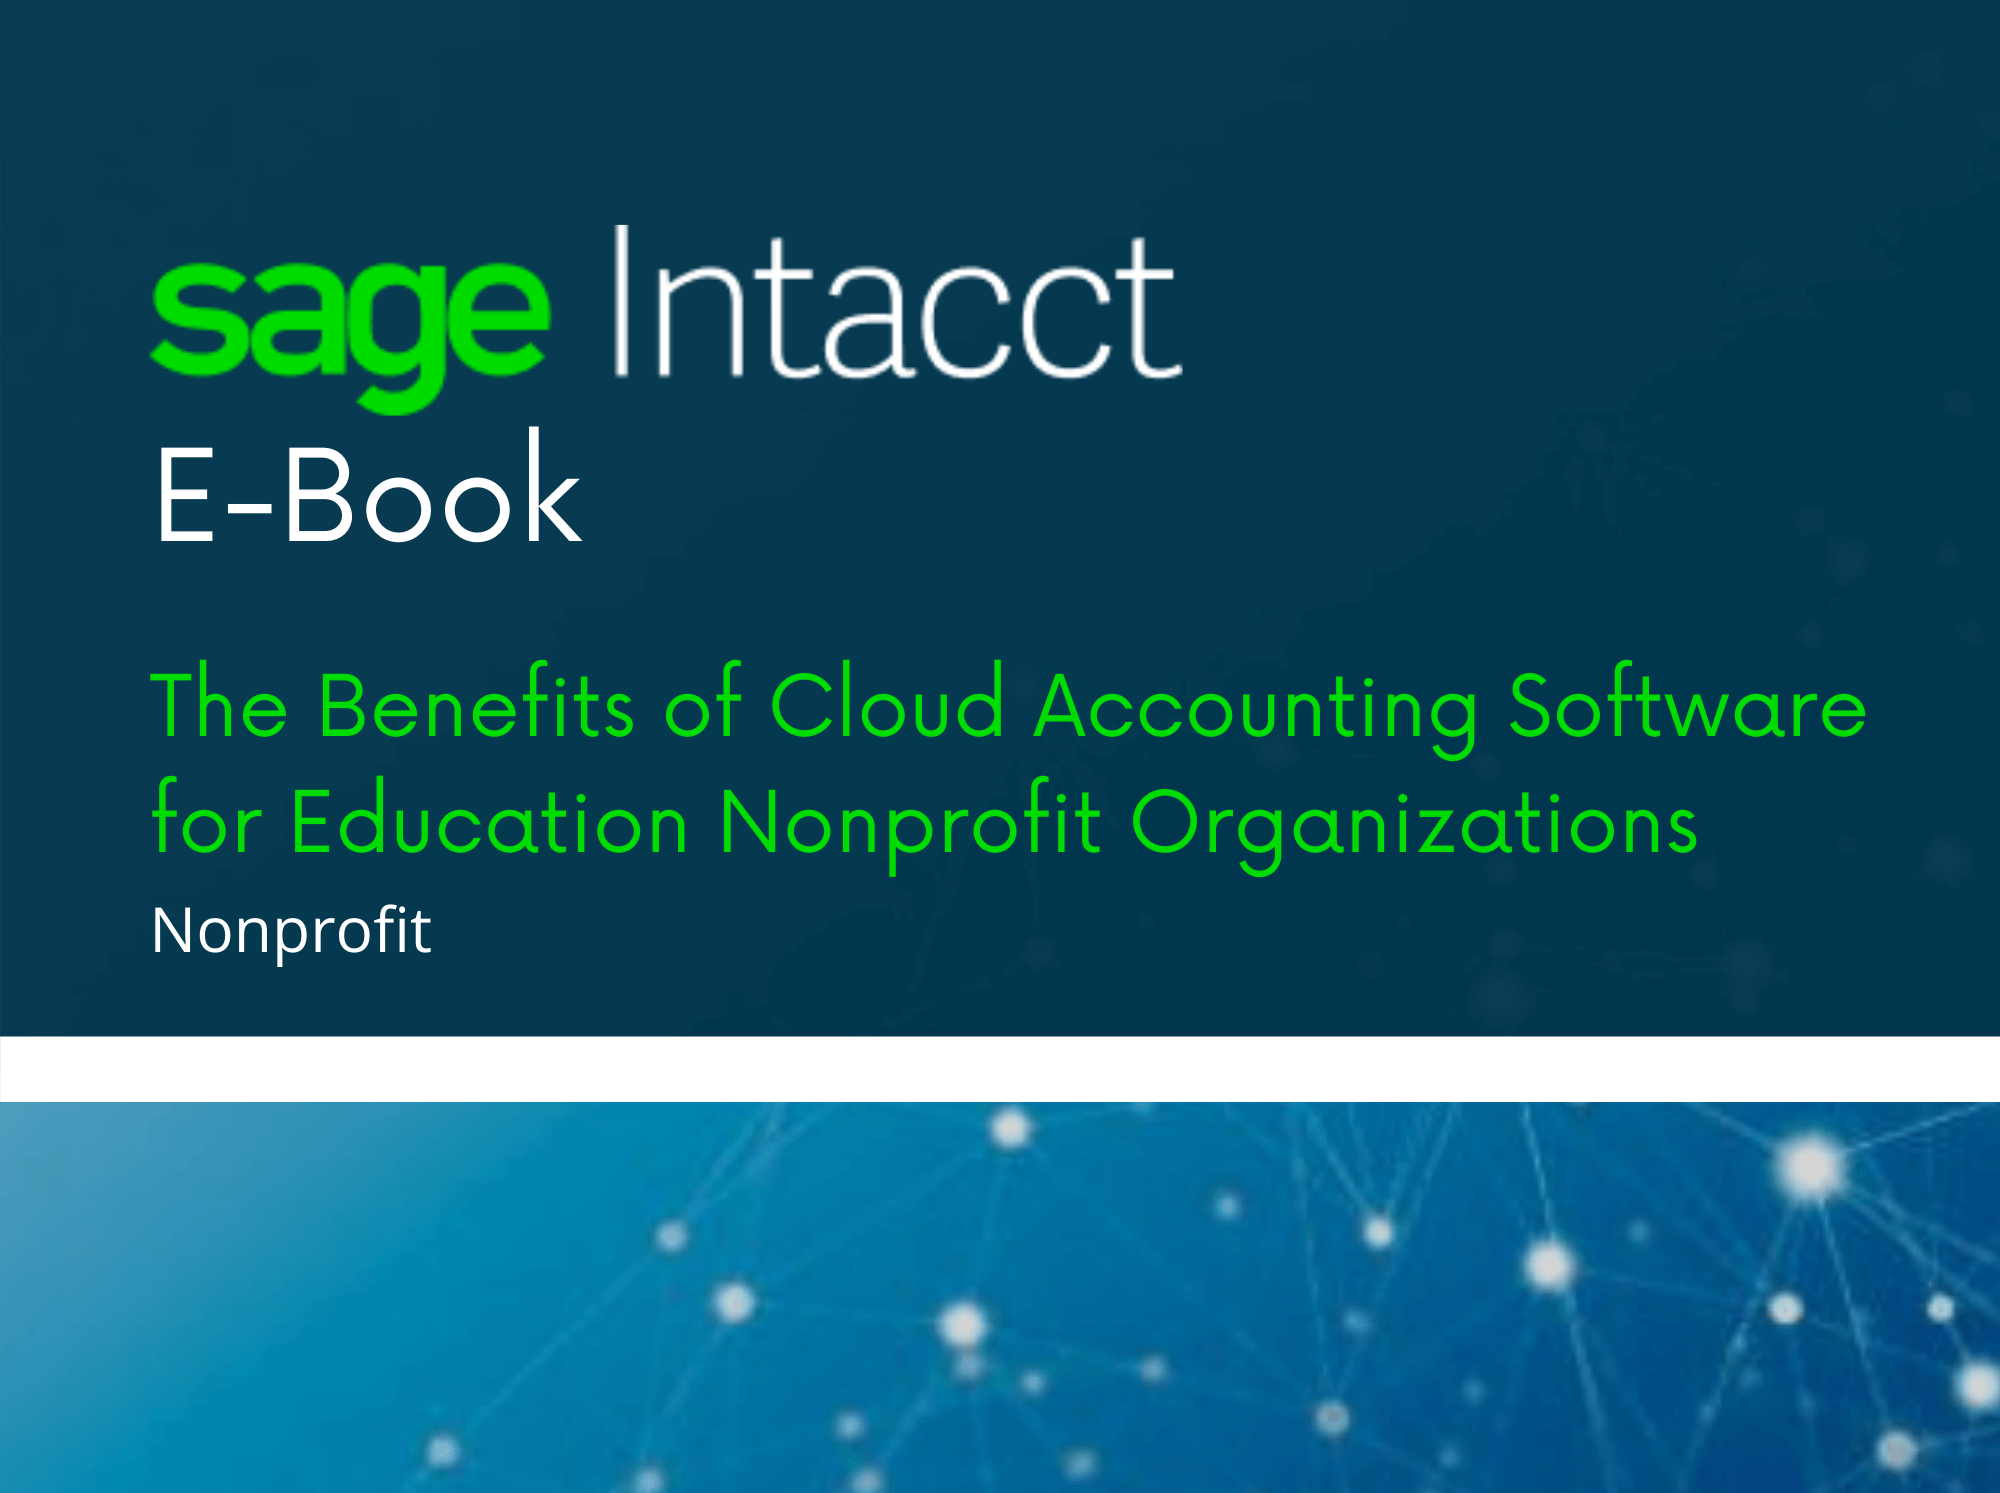 Sage Intacct: E-Book The Benefits of Cloud Accounting Software for Education Nonprofit Organizations